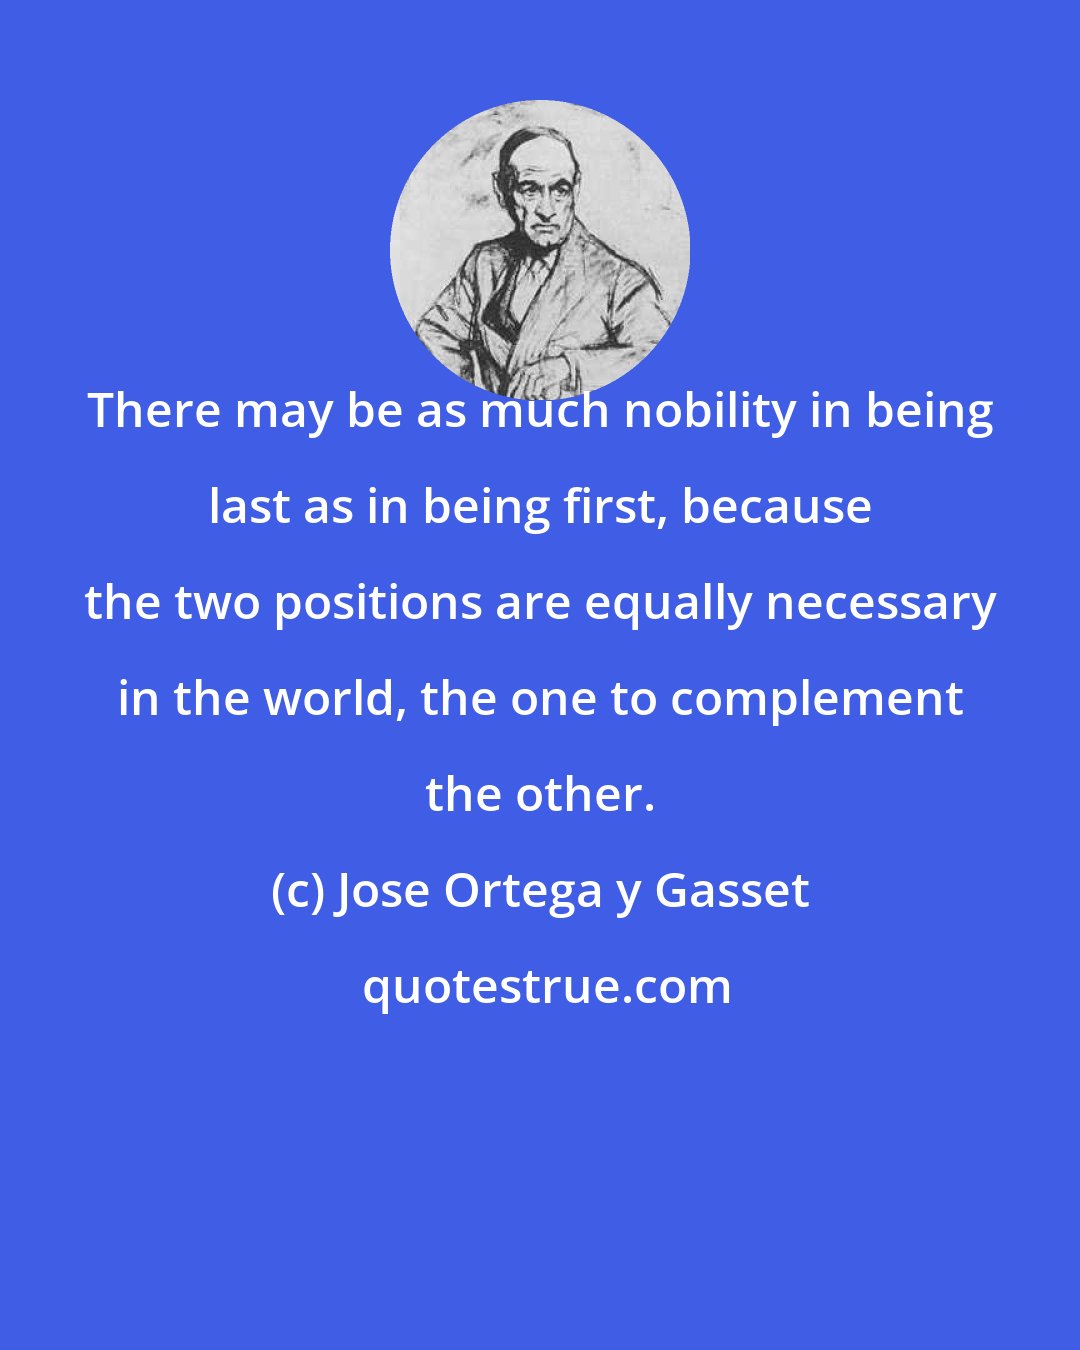 Jose Ortega y Gasset: There may be as much nobility in being last as in being first, because the two positions are equally necessary in the world, the one to complement the other.